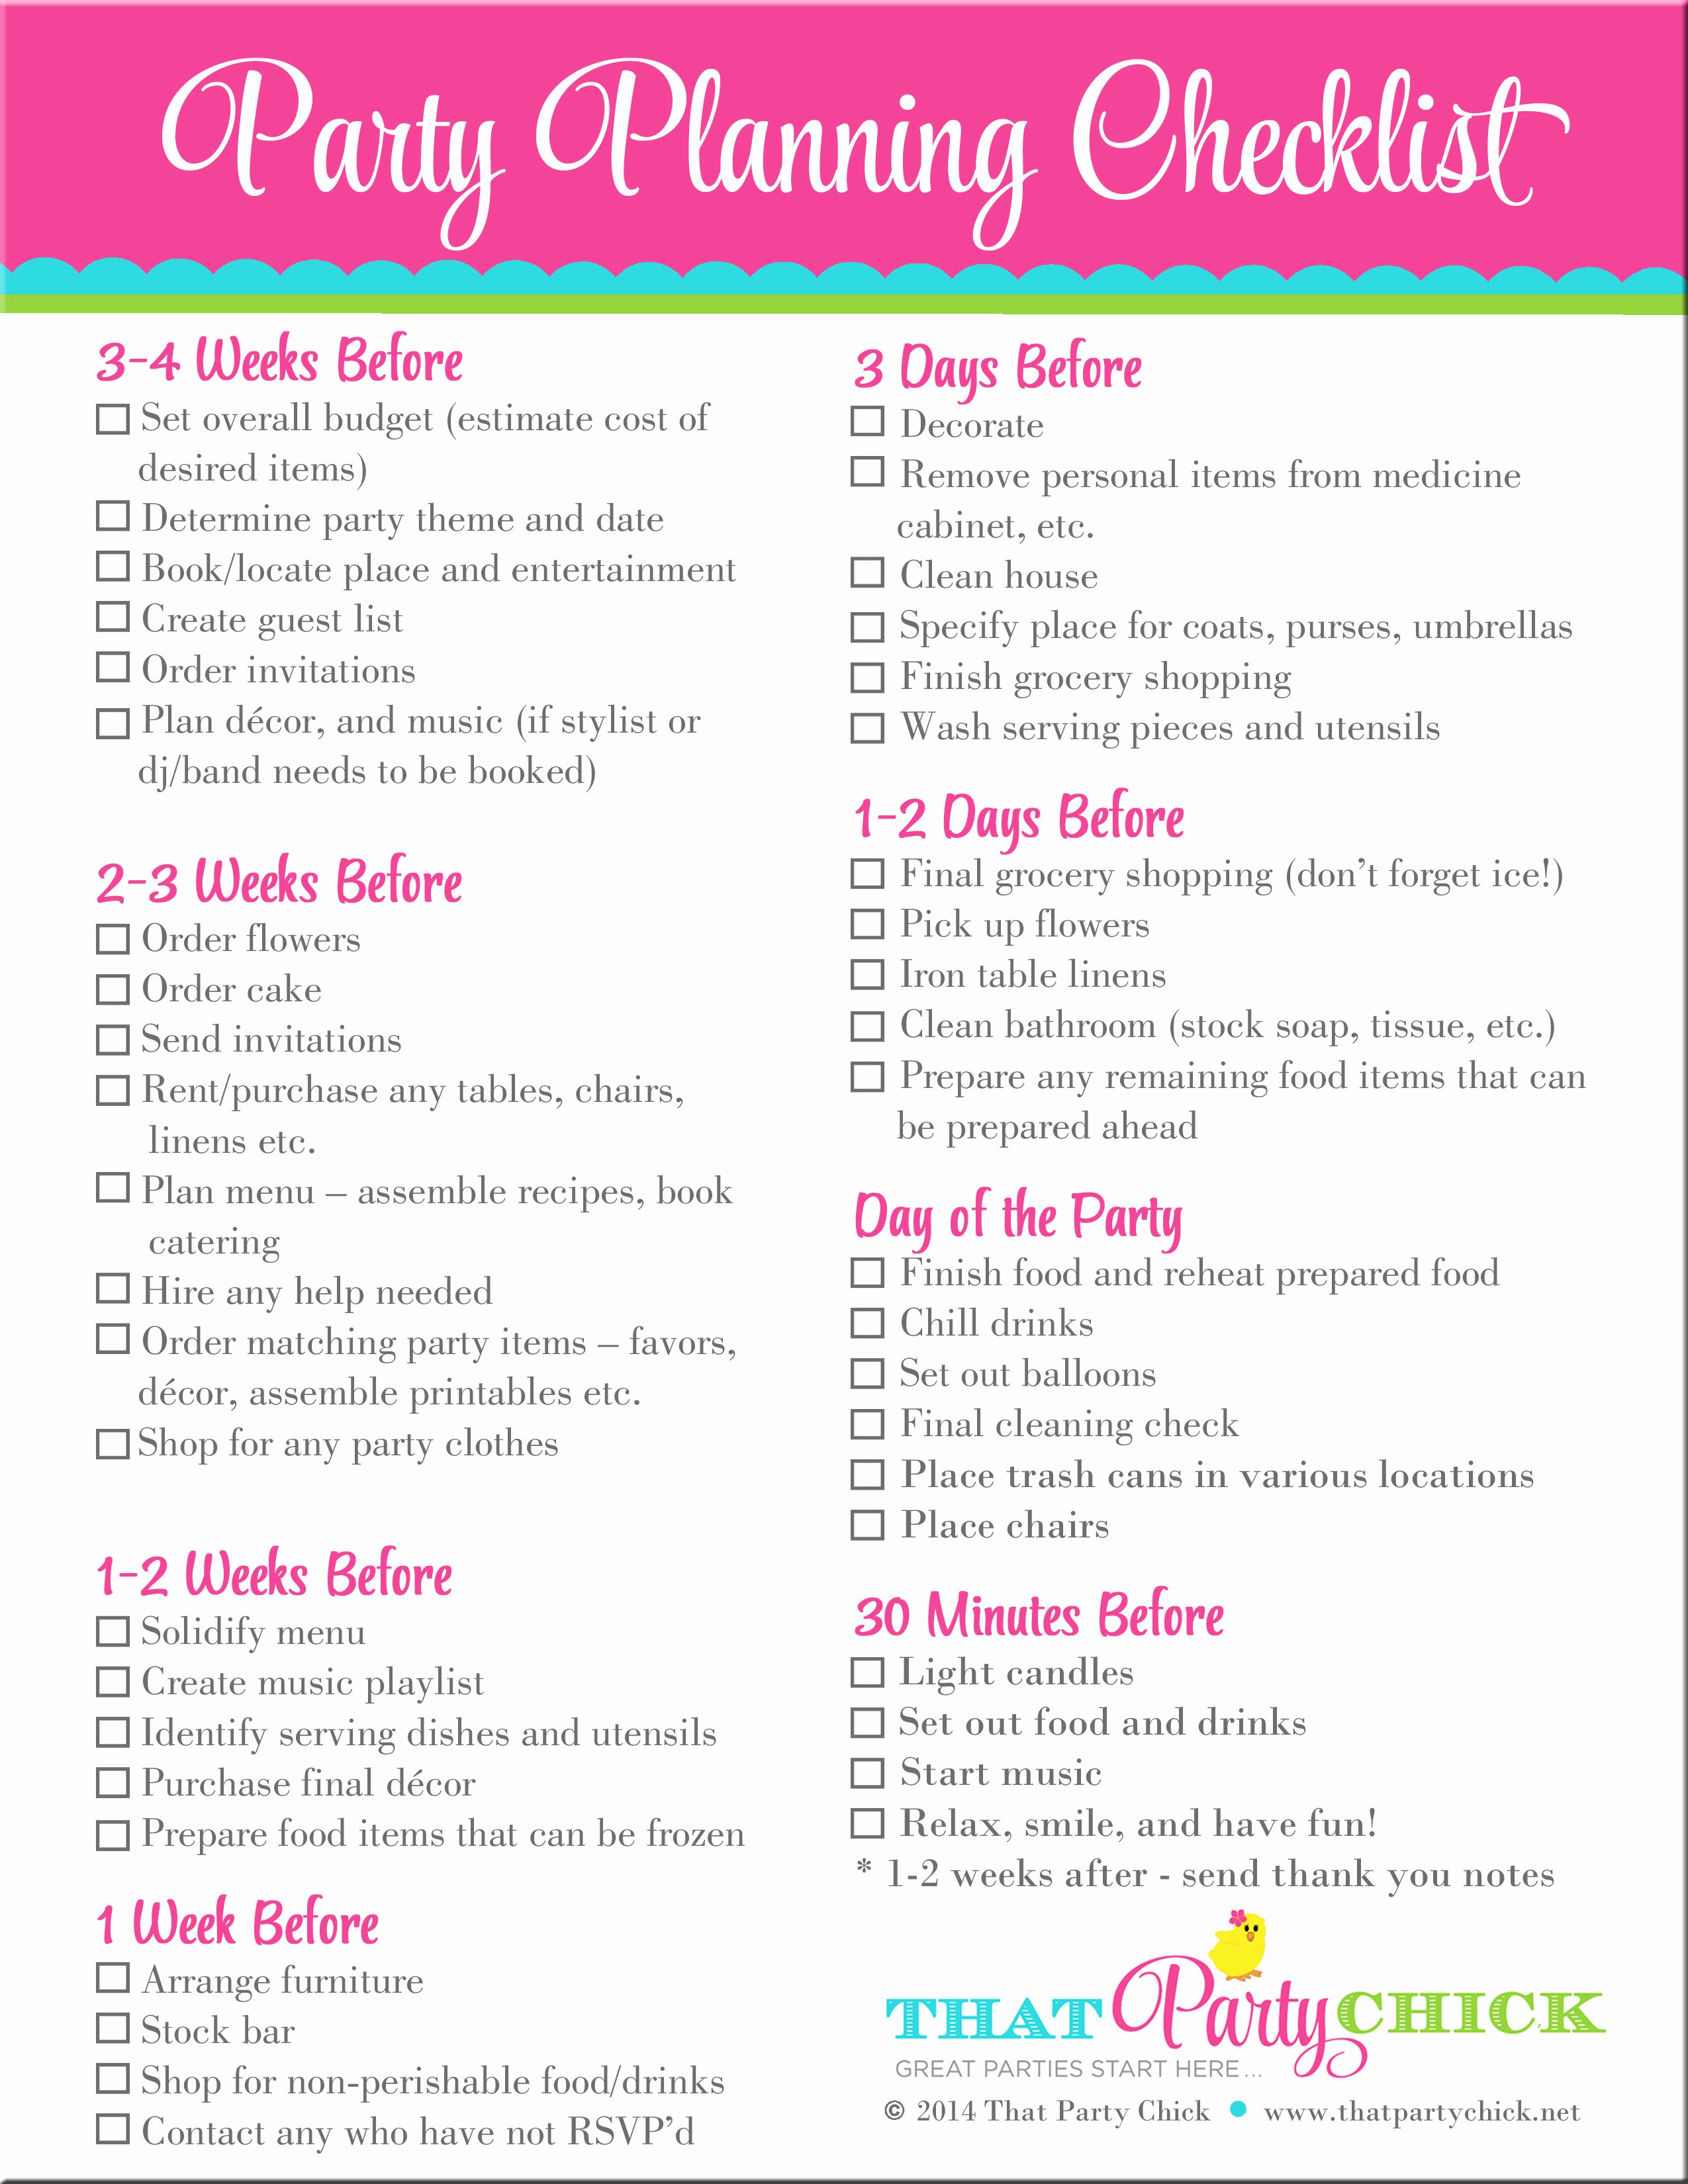 Event Planning Checklist Pdf Best Of Party Planning Checklist Free Download that Party Chick